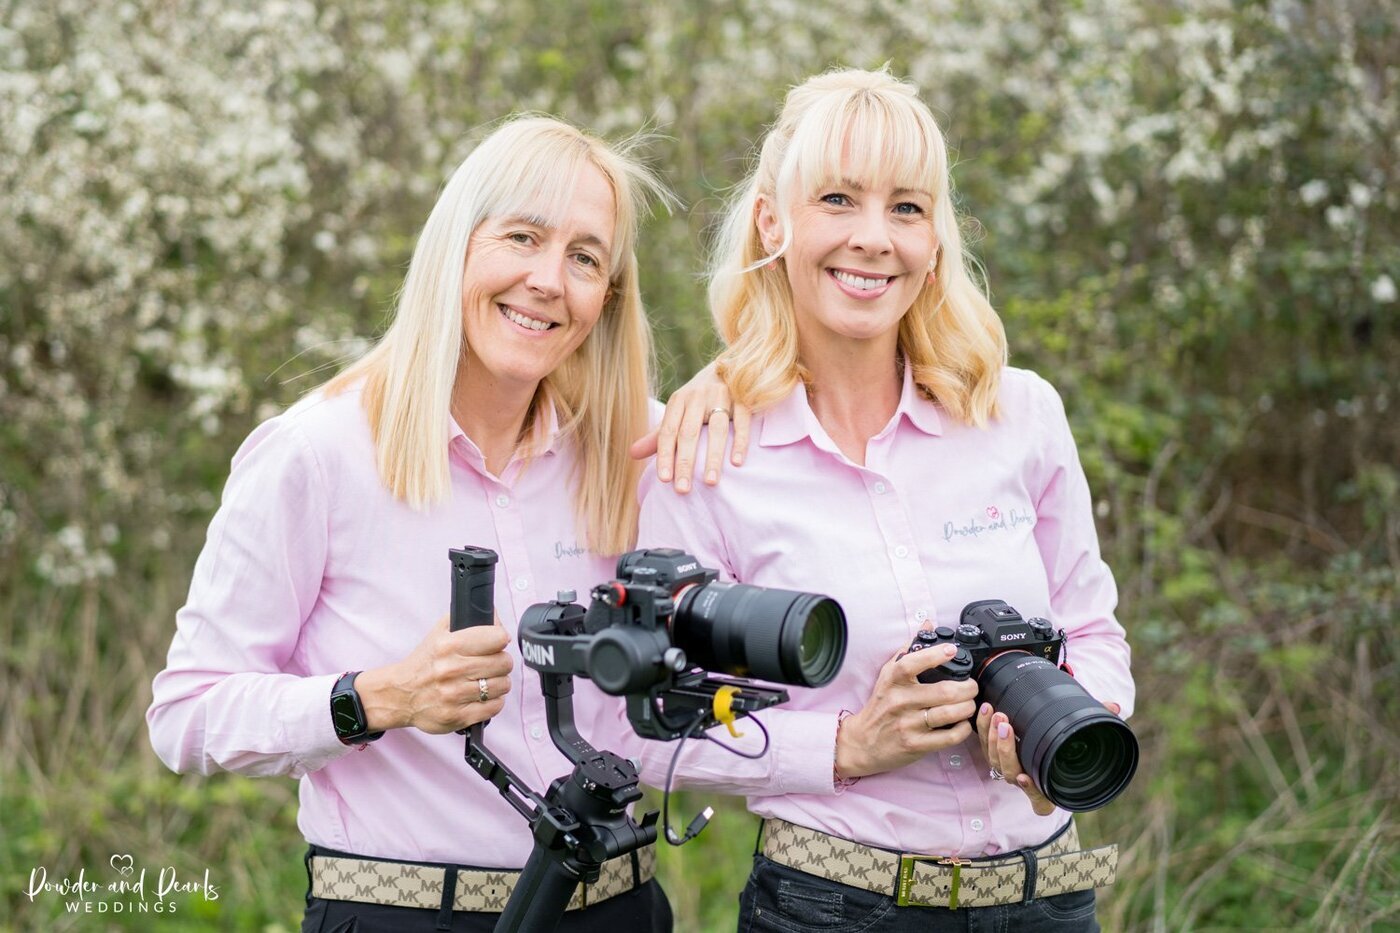 Owned by the wife and wife team of Tracey and Jodie, who have filmed and photographed hundreds of weddings for over ten years, Powder and Pearls has become the go-to name for engaged couples in Bristol, Bath, Cardiff, Gloucester, and beyond.